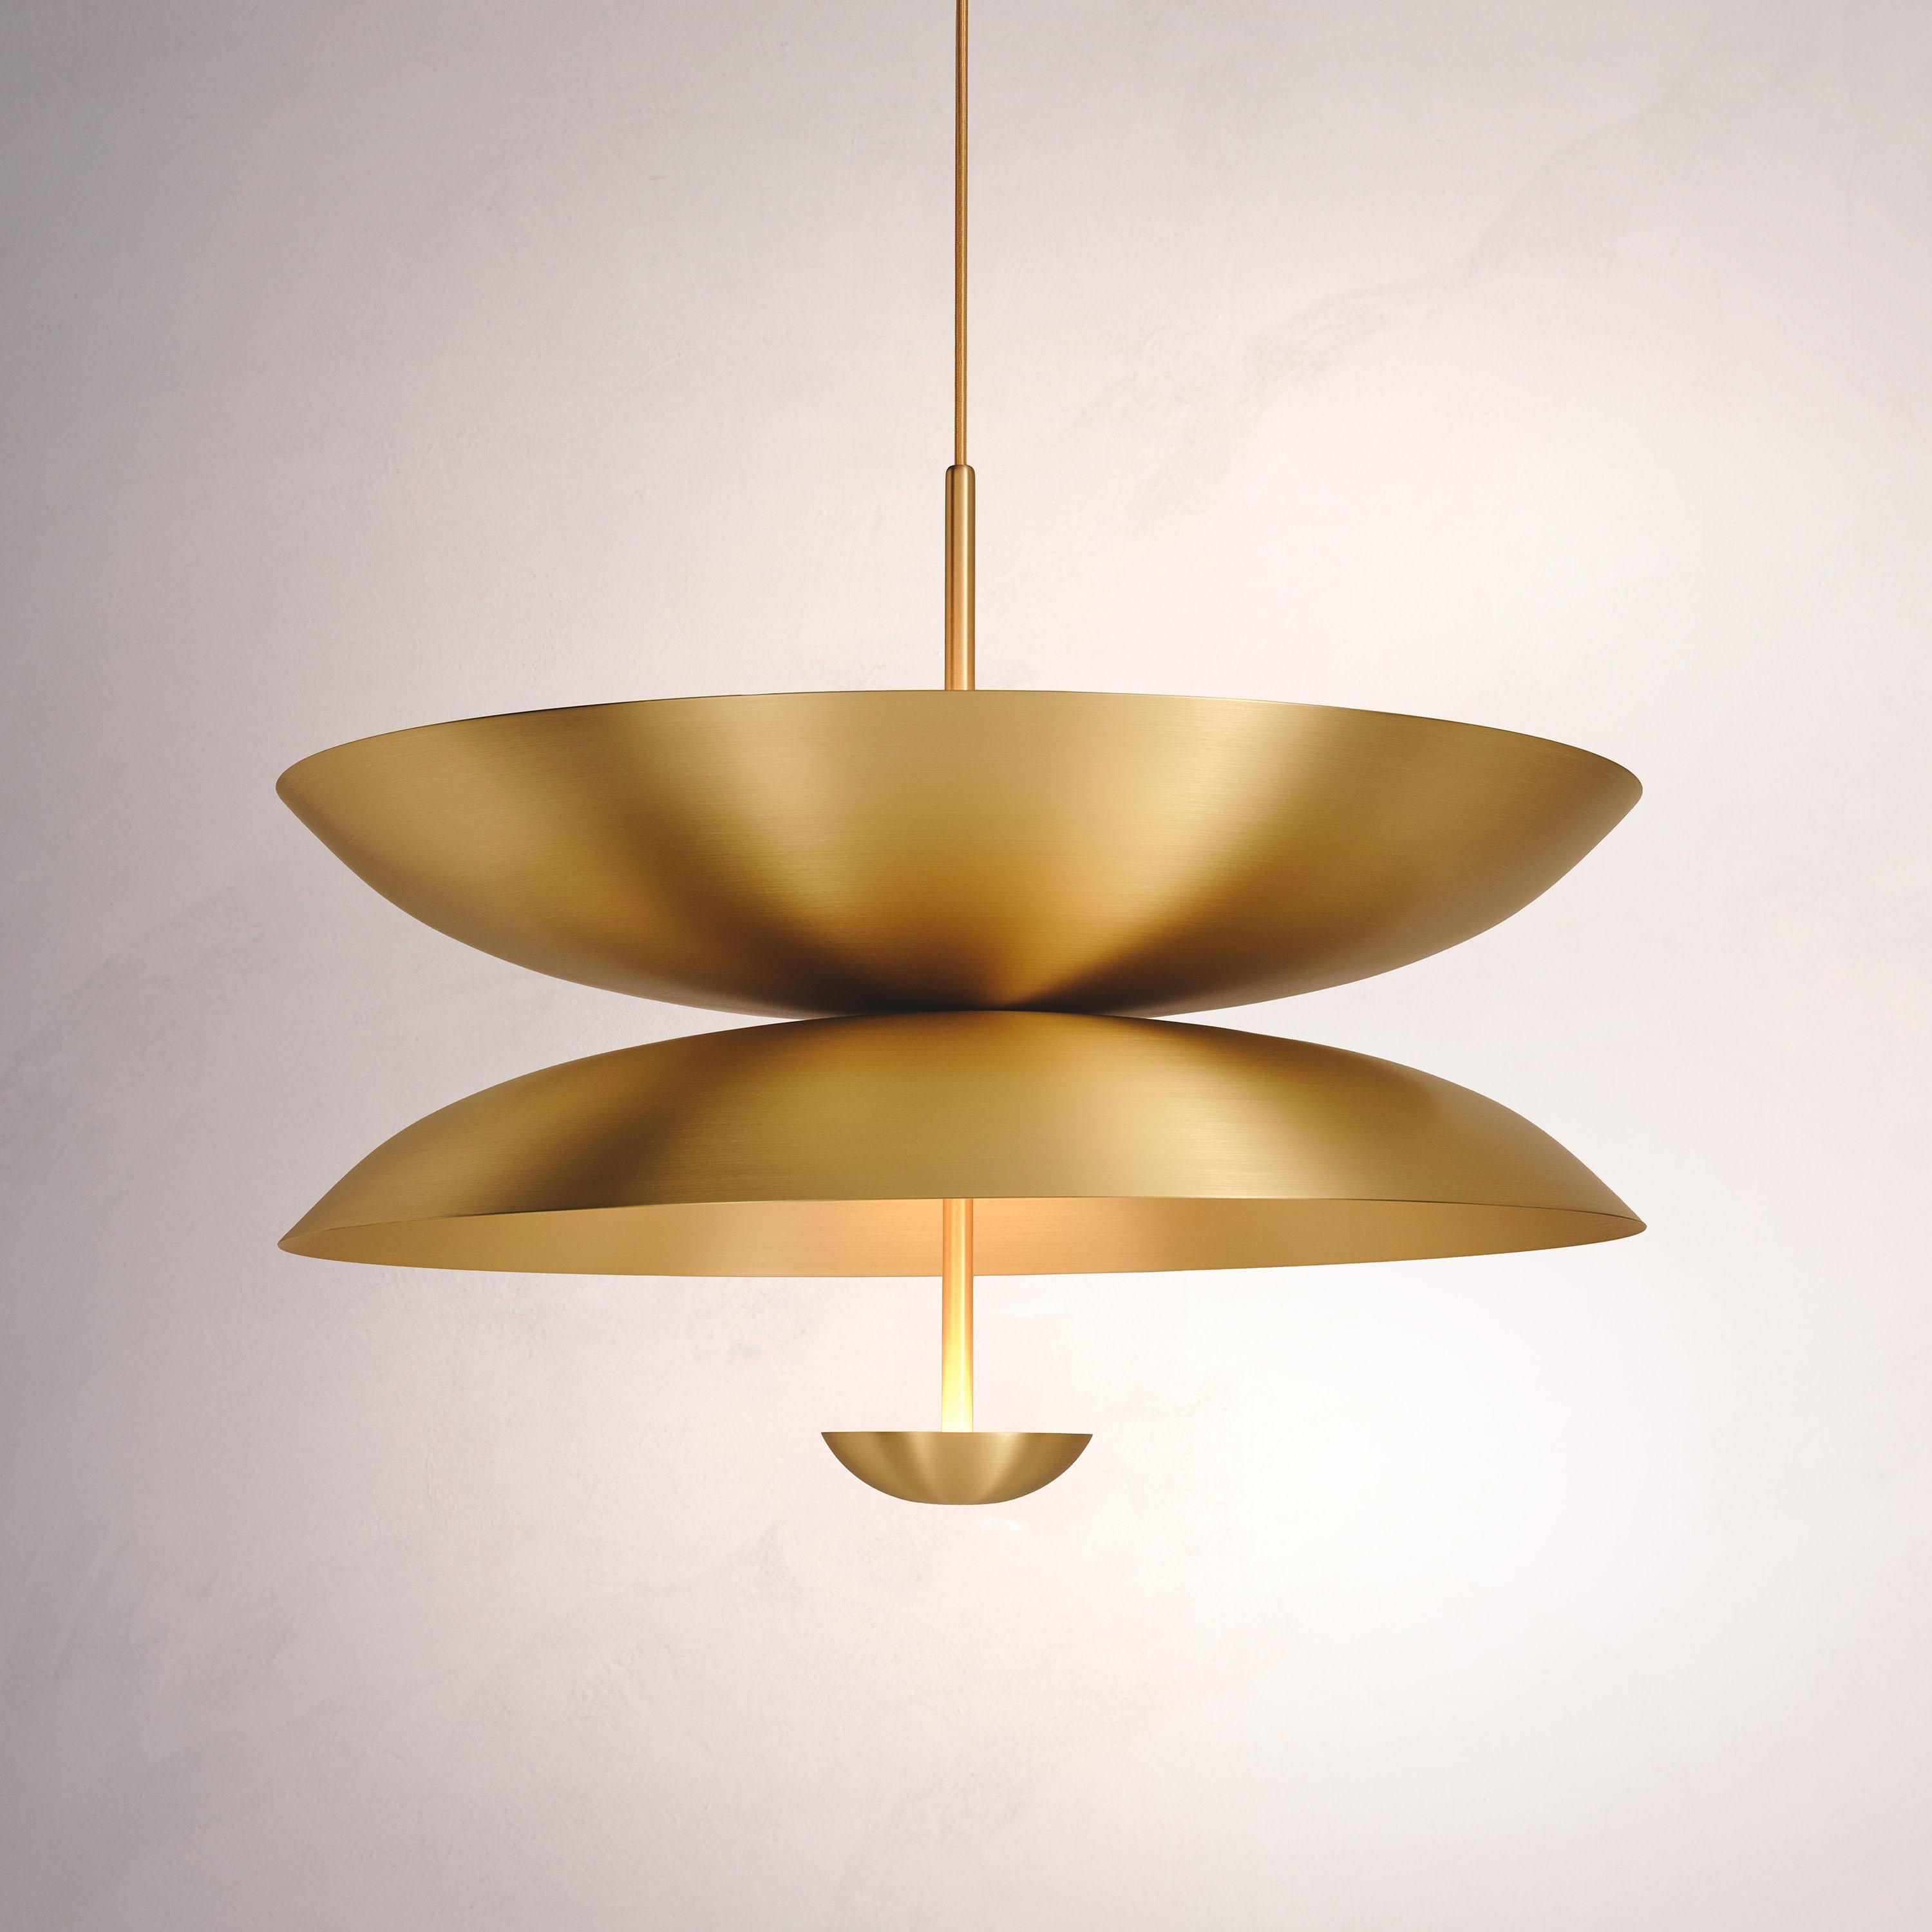 Inspired by planet-like shapes and textures, the Cosmic collection plays with both metal properties and a selection of patina finishes.
 
The Pendant Duo Sol is composed of three carefully hand-spun brass plates and preserves the beautiful texture